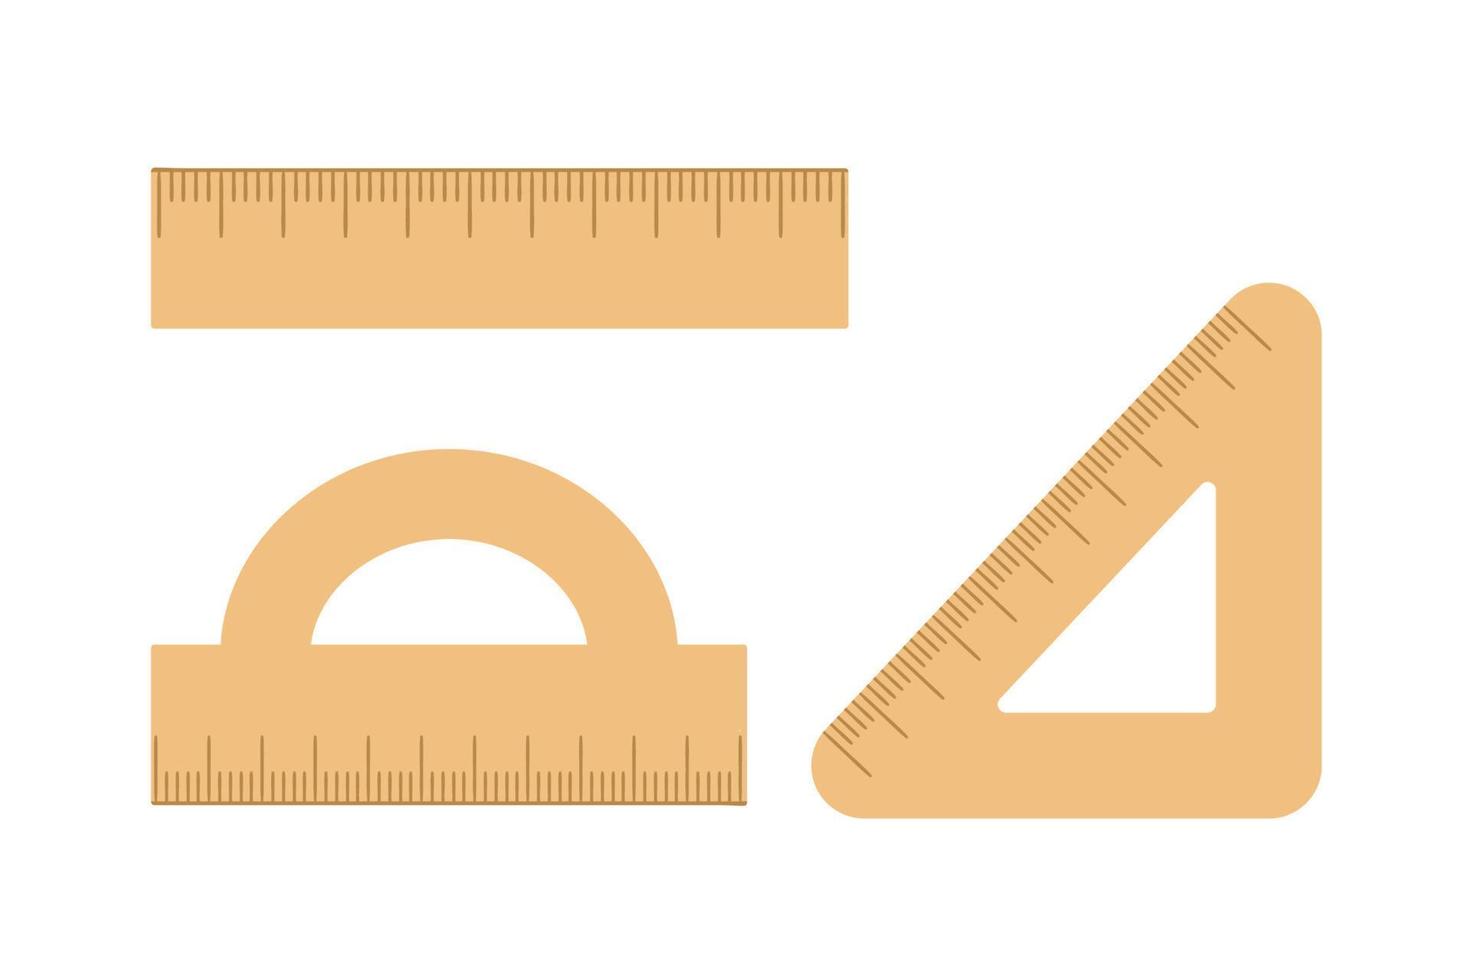 Vector set of rulers. Back to school educational clipart. Cute flat style measuring tools illustration.